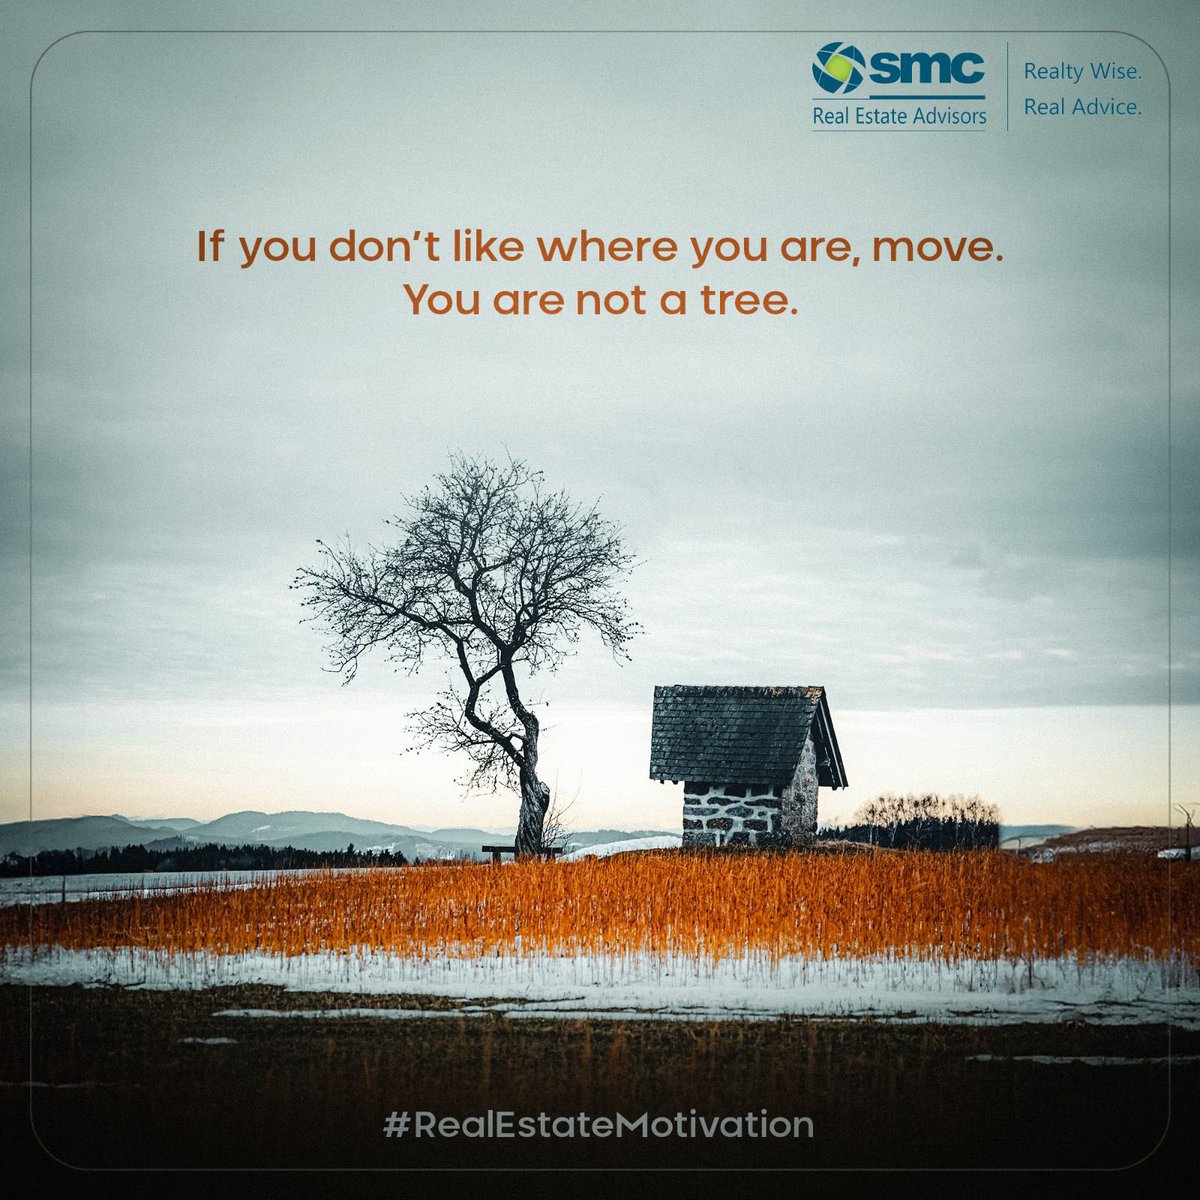 Move-in to a better 🏠 Visit: bit.ly/SMCRealty . . . . . . . #SMCRealty #RealEstateMotivation #RealEstateIndia #RealtyIndia #RealtorLife #RealtorIndia #HomesIndia #InvestmentIndia #RealEstateDelhi #RealEstateNCR #RealEstatePune #RealEstateBangalore #RealEstateMumbai